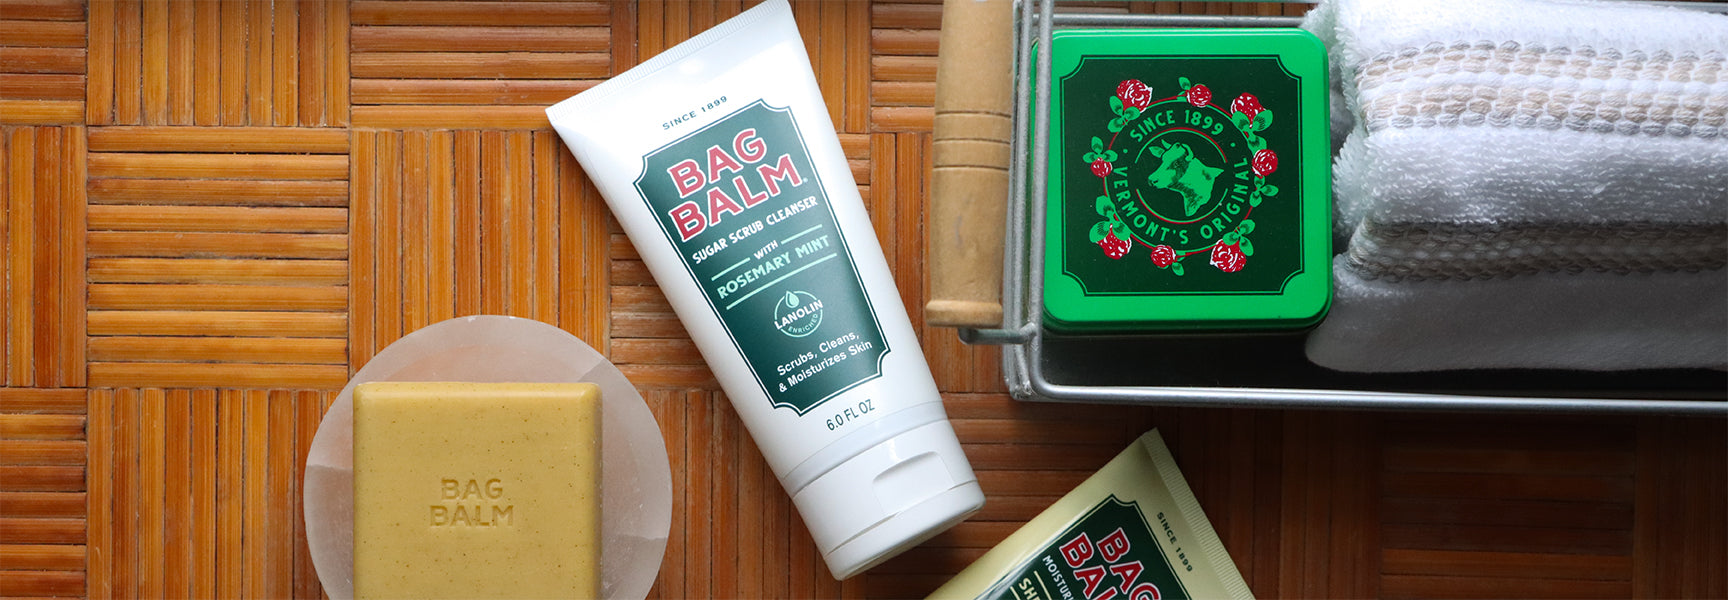 An image containing the following three Bag Balm products on a wood background: Bag Balm tin, Moisturizing Bar Soap, Sugar Scrub Cleanser